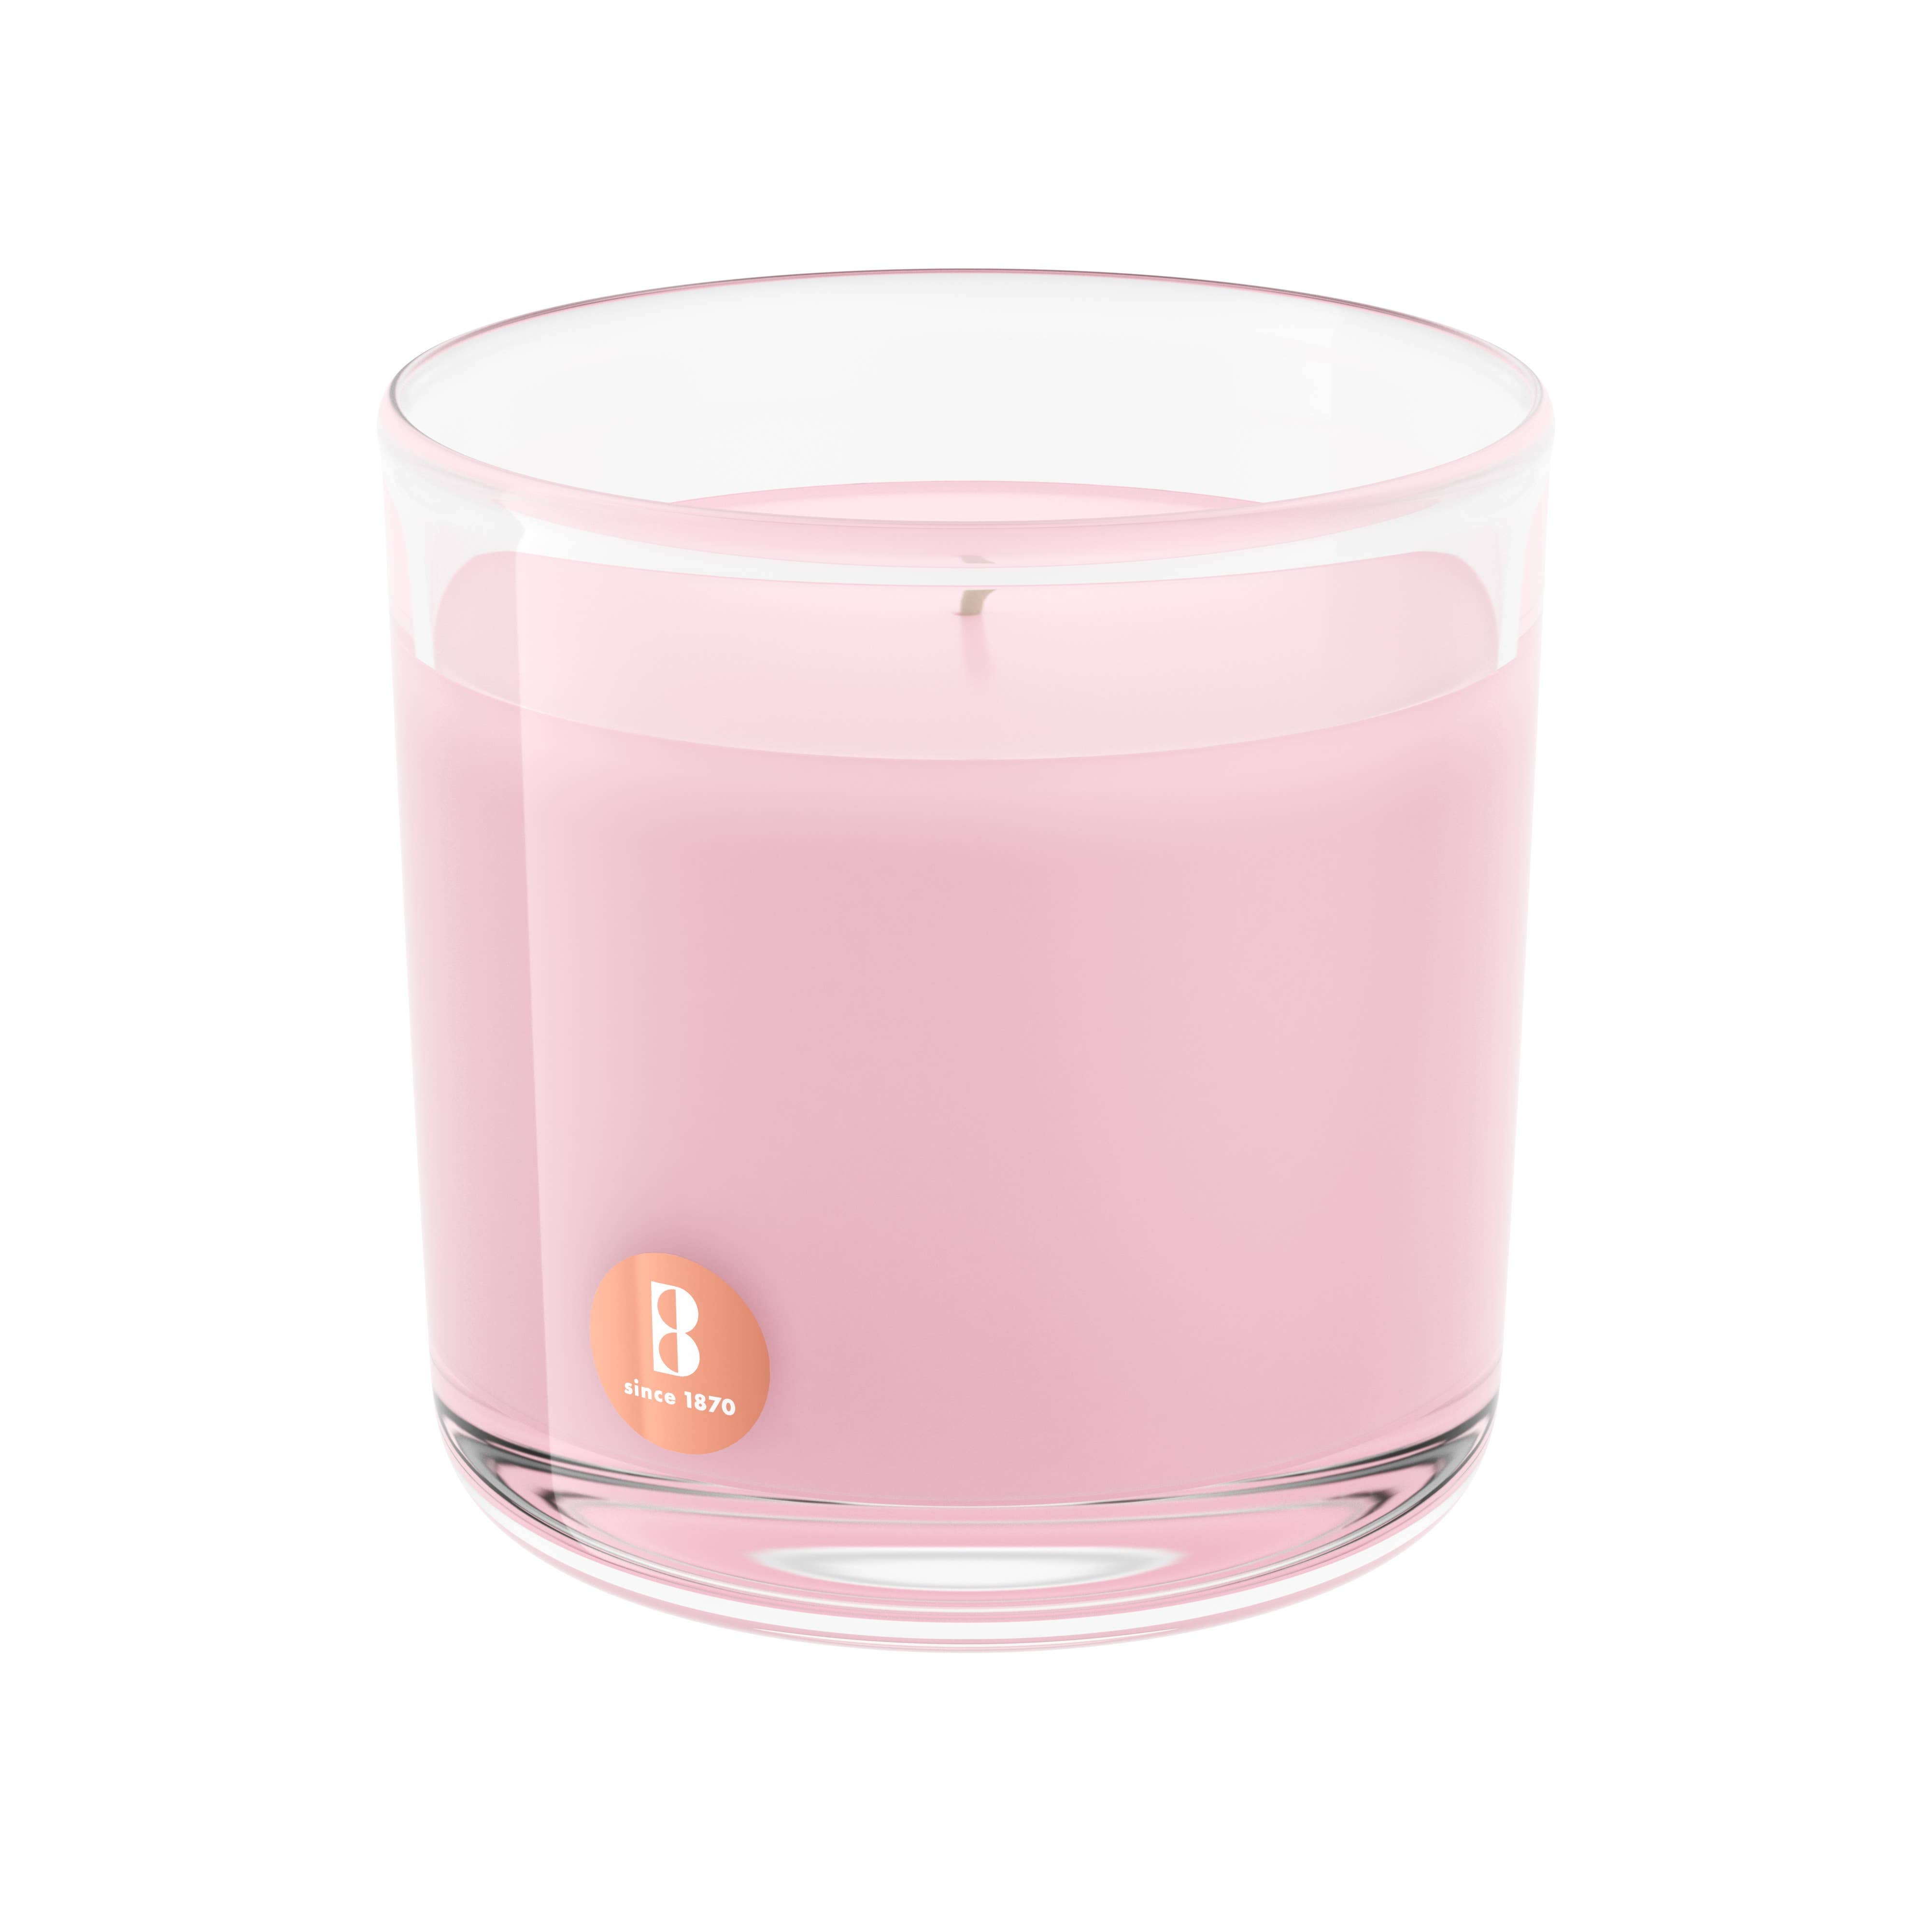 Candle: Magnolia Scented Candle - 3.75 x 3.75 Inches - 43